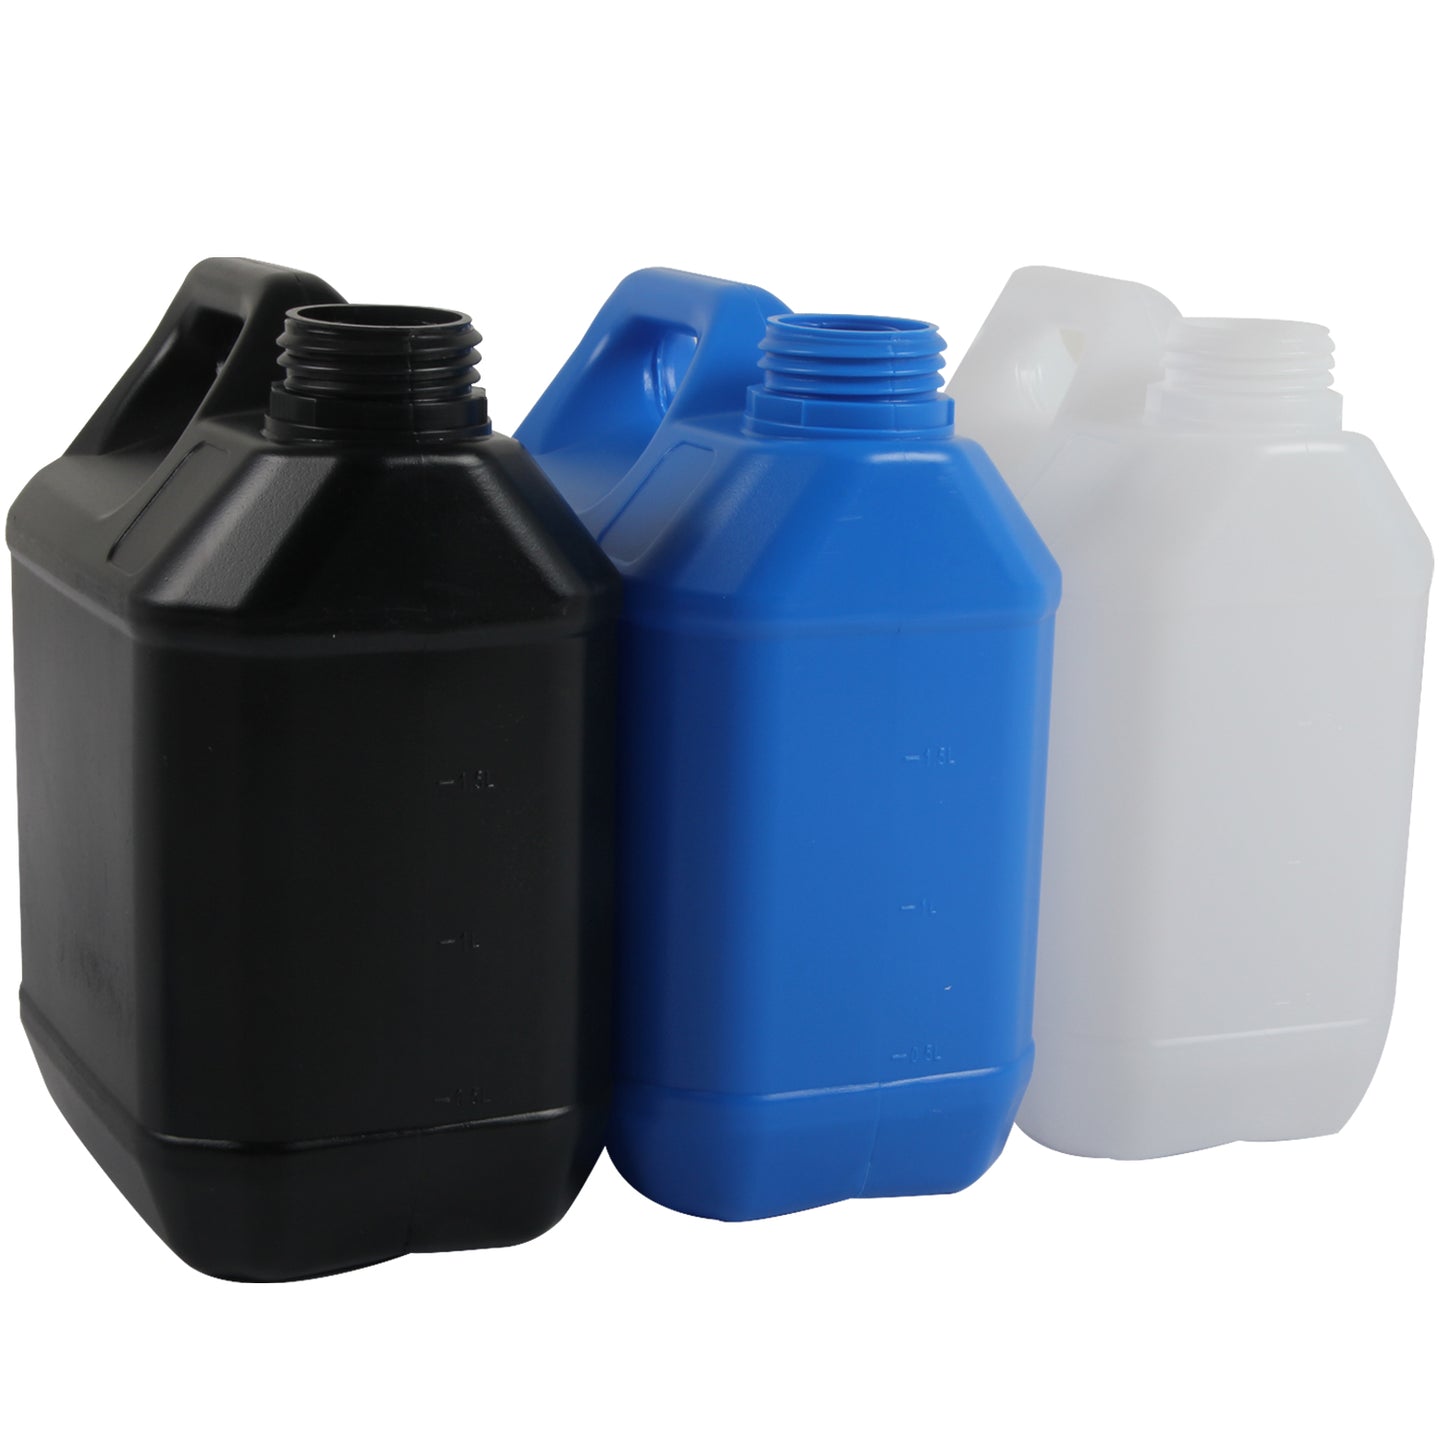 3X Easy Store Easy Pour 2L Darkroom Chemical Liquid Storage Bottles with Caps for Developer Fixer Stopper